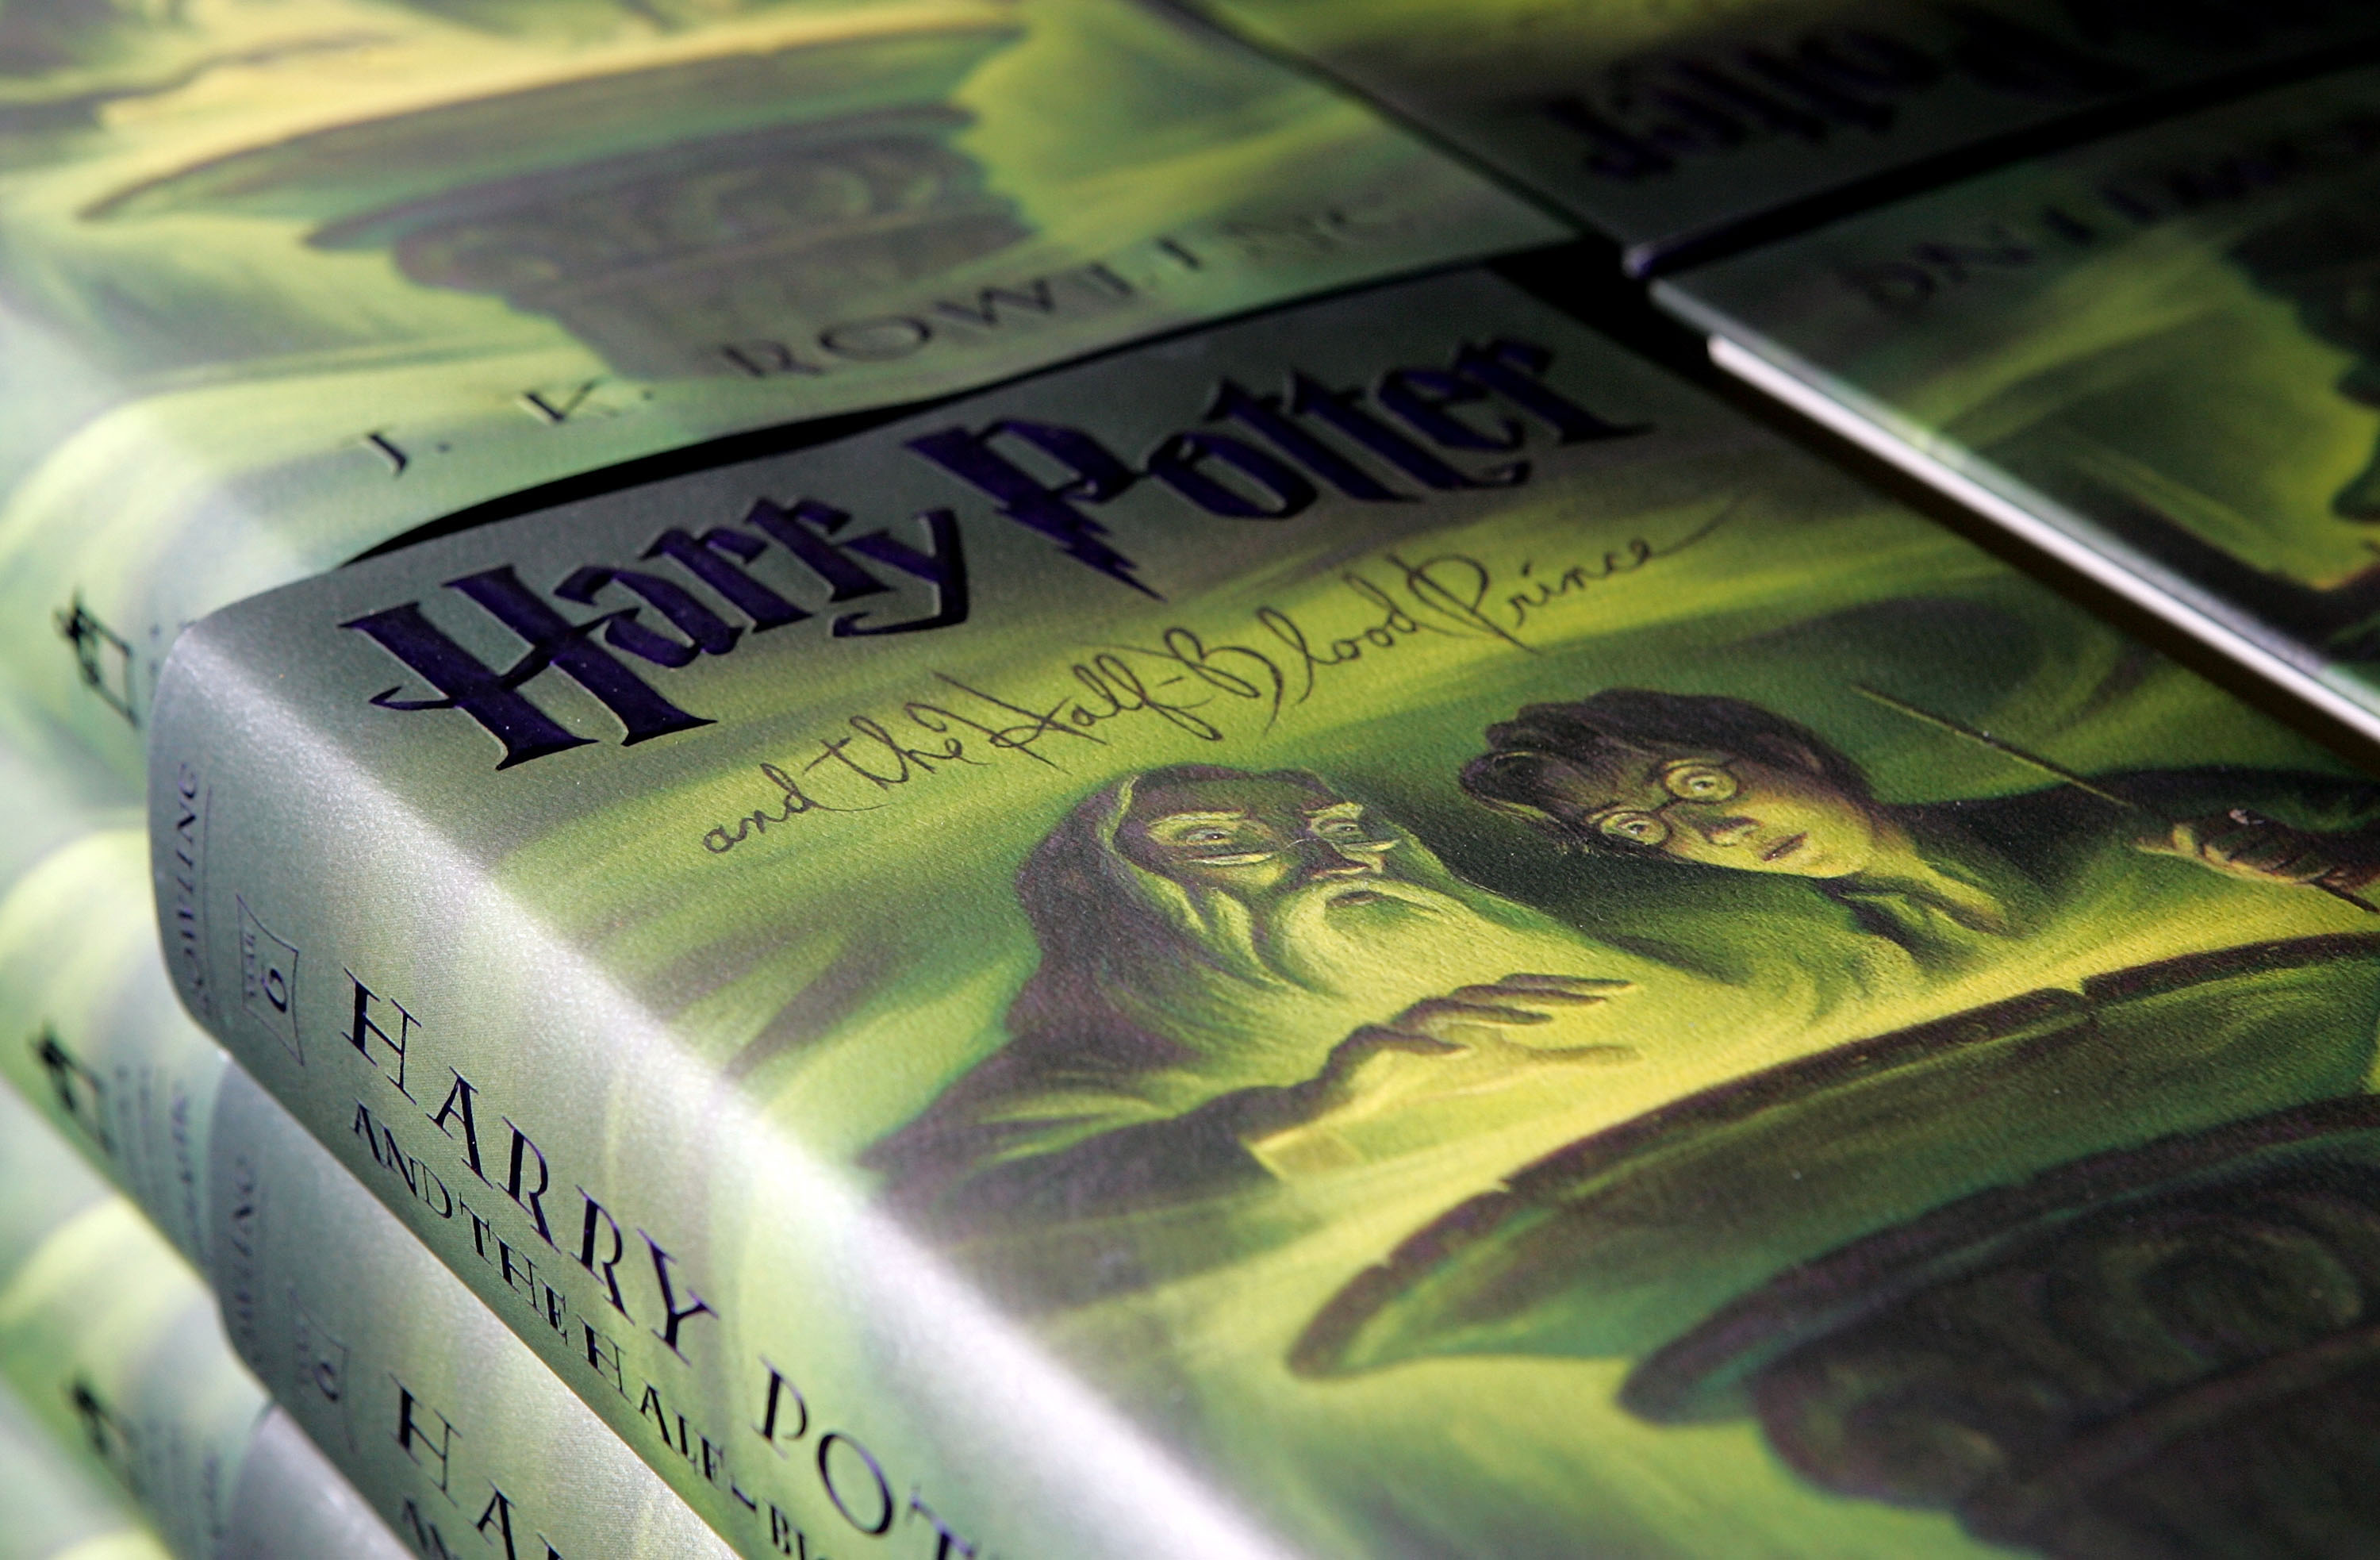 Copies of the new <i>Harry Potter and the Half-Blood Prince</i>, by author J.K. Rowling, are seen at the Amazon.com shipping facility July 11, 2005, in Fernley, Nev. (Justin Sullivan&mdash;Getty Images)